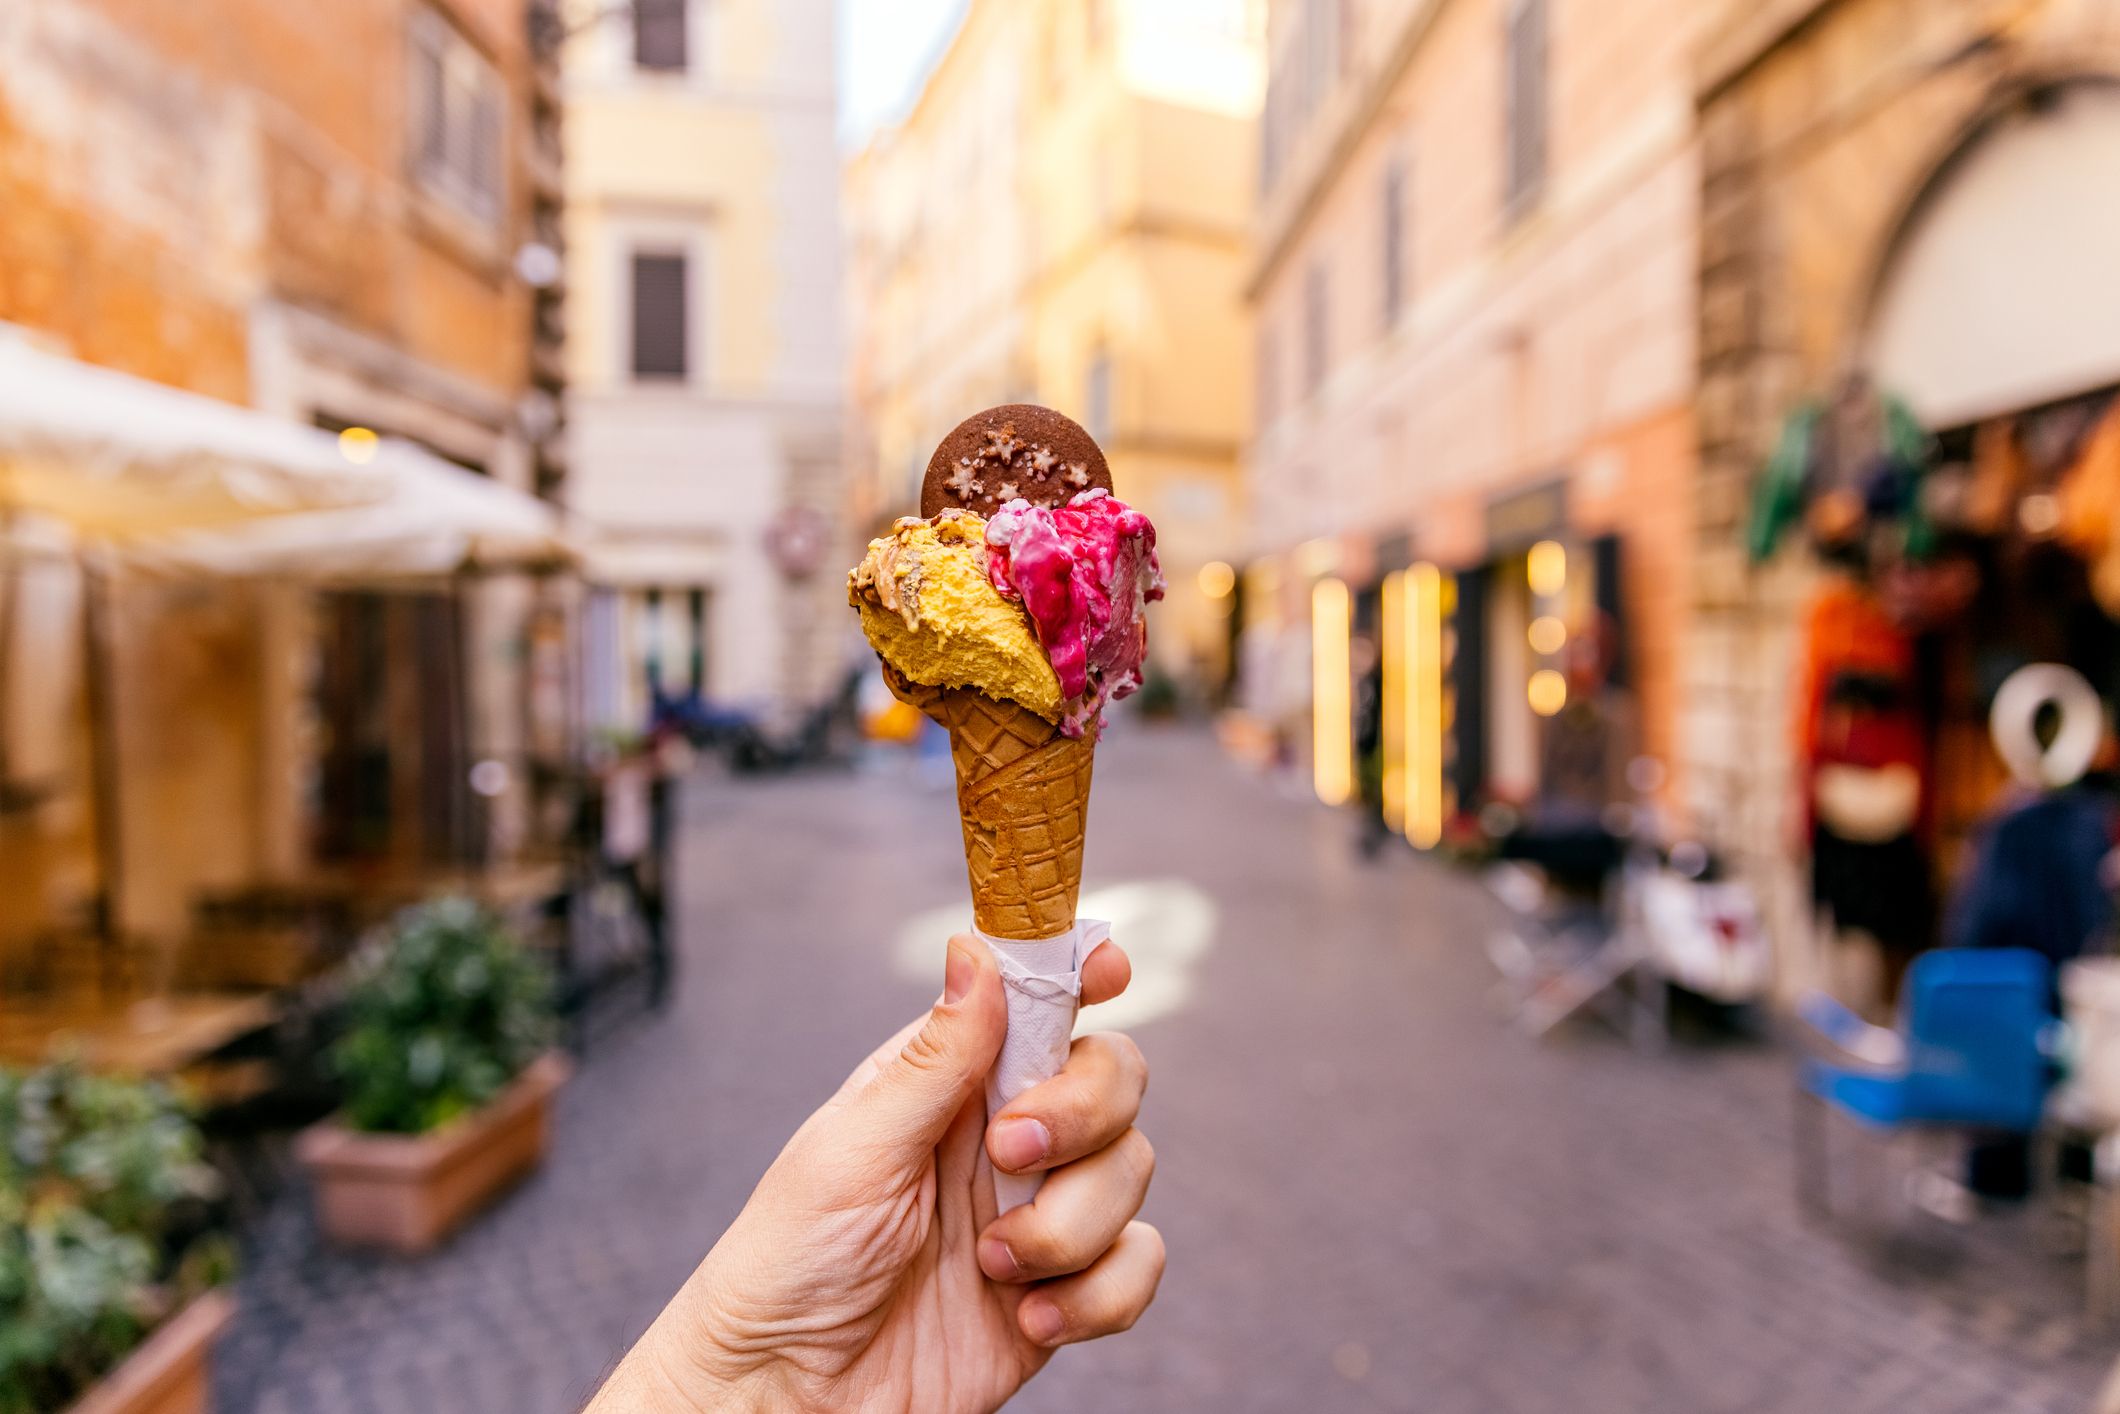 eating ice cream in the streets of rome personal royalty free image